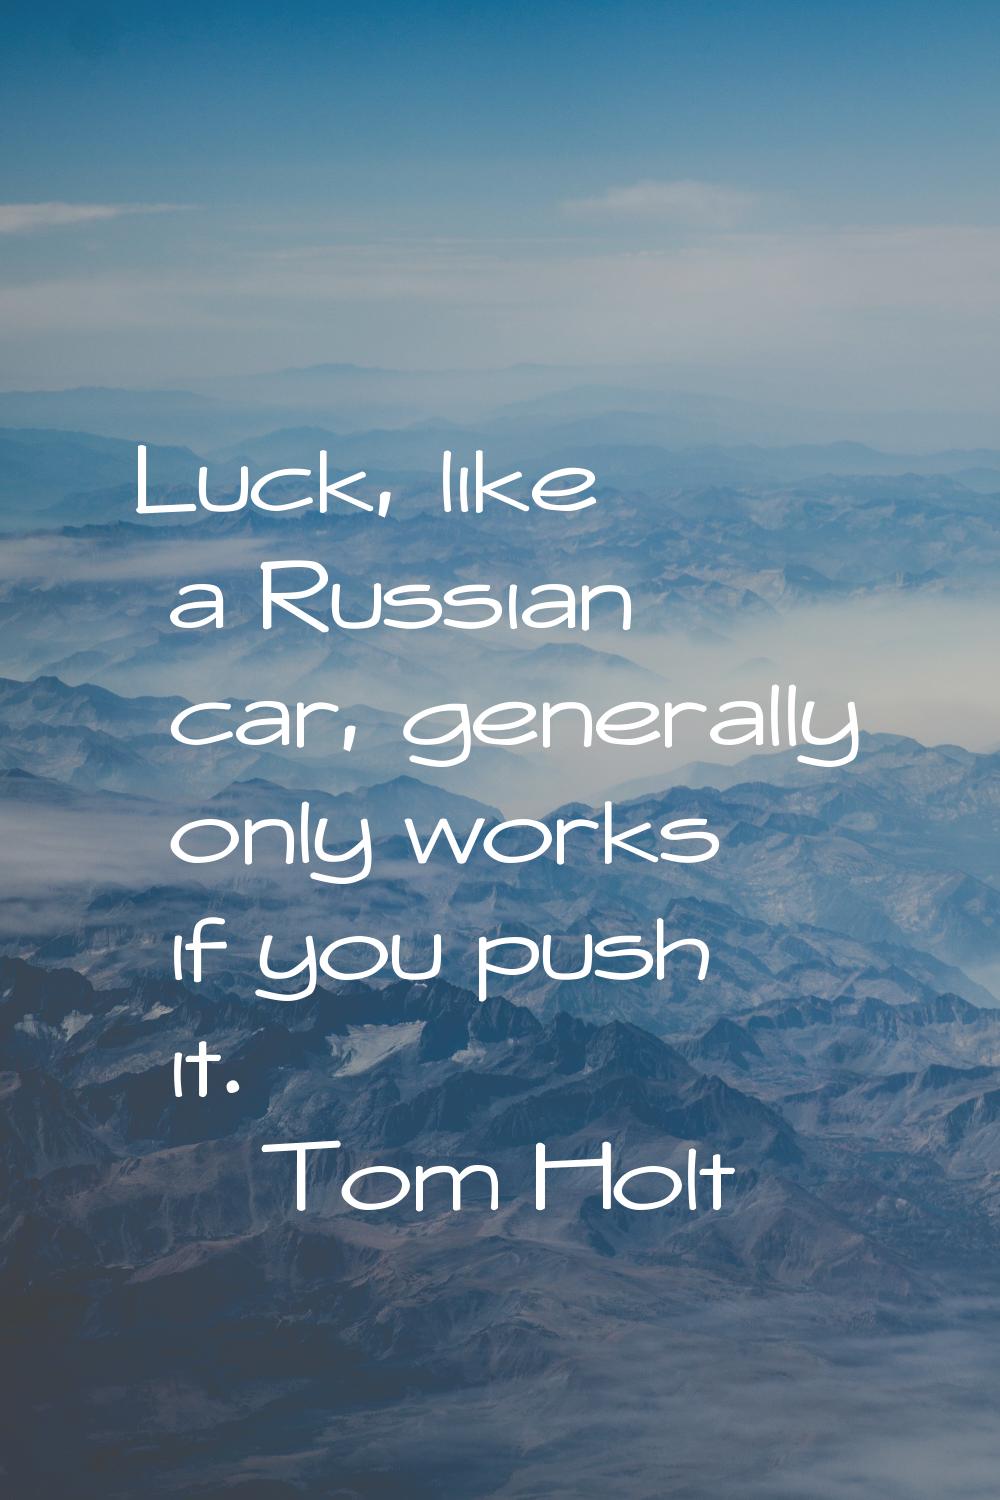 Luck, like a Russian car, generally only works if you push it.